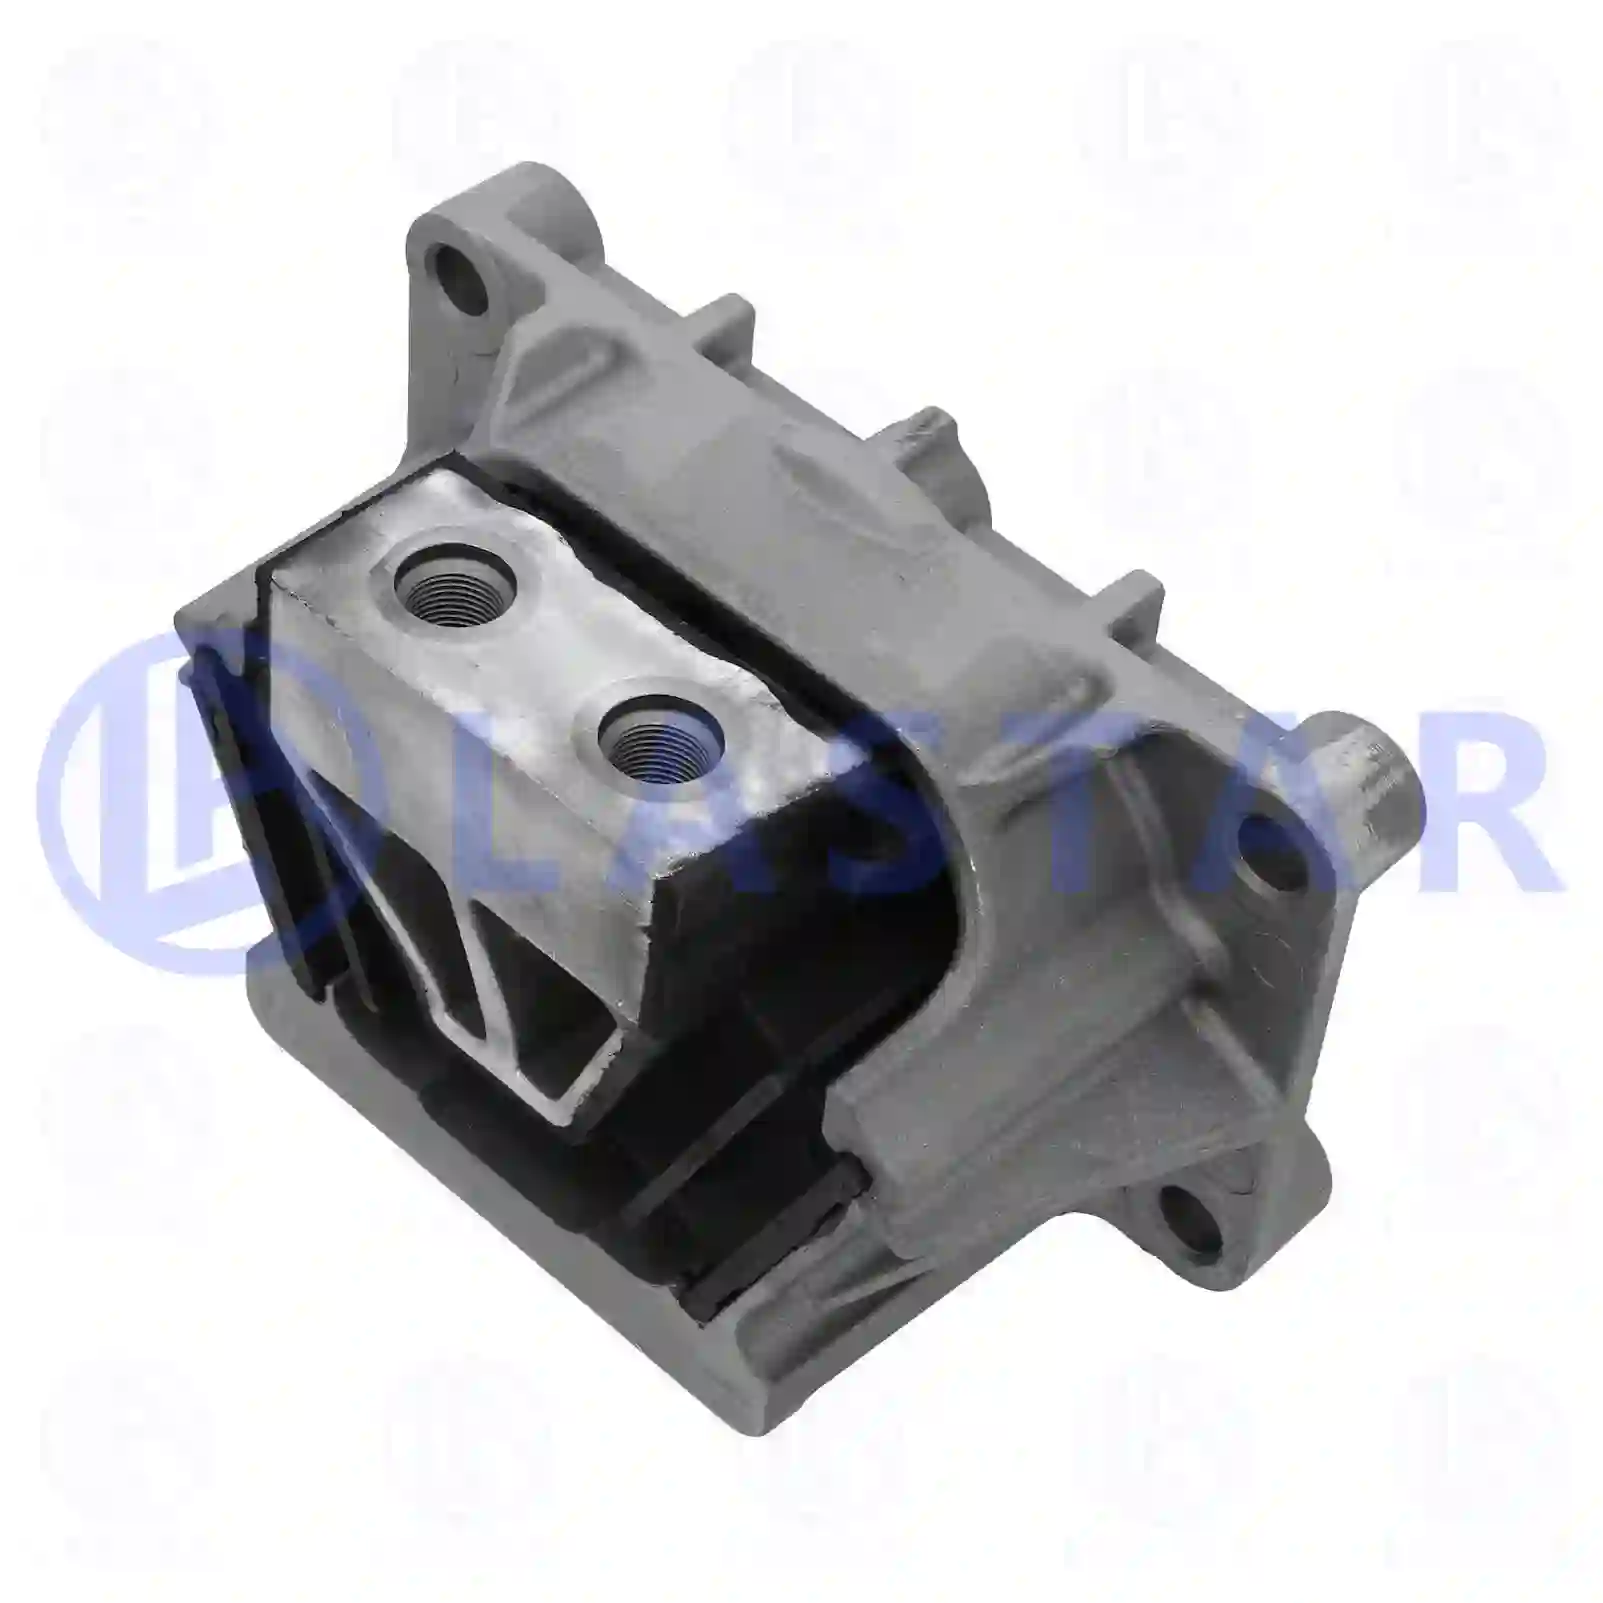 Engine mounting, 77702400, 9412411313, 9412414313, 9412415313, 9412417313, , ||  77702400 Lastar Spare Part | Truck Spare Parts, Auotomotive Spare Parts Engine mounting, 77702400, 9412411313, 9412414313, 9412415313, 9412417313, , ||  77702400 Lastar Spare Part | Truck Spare Parts, Auotomotive Spare Parts